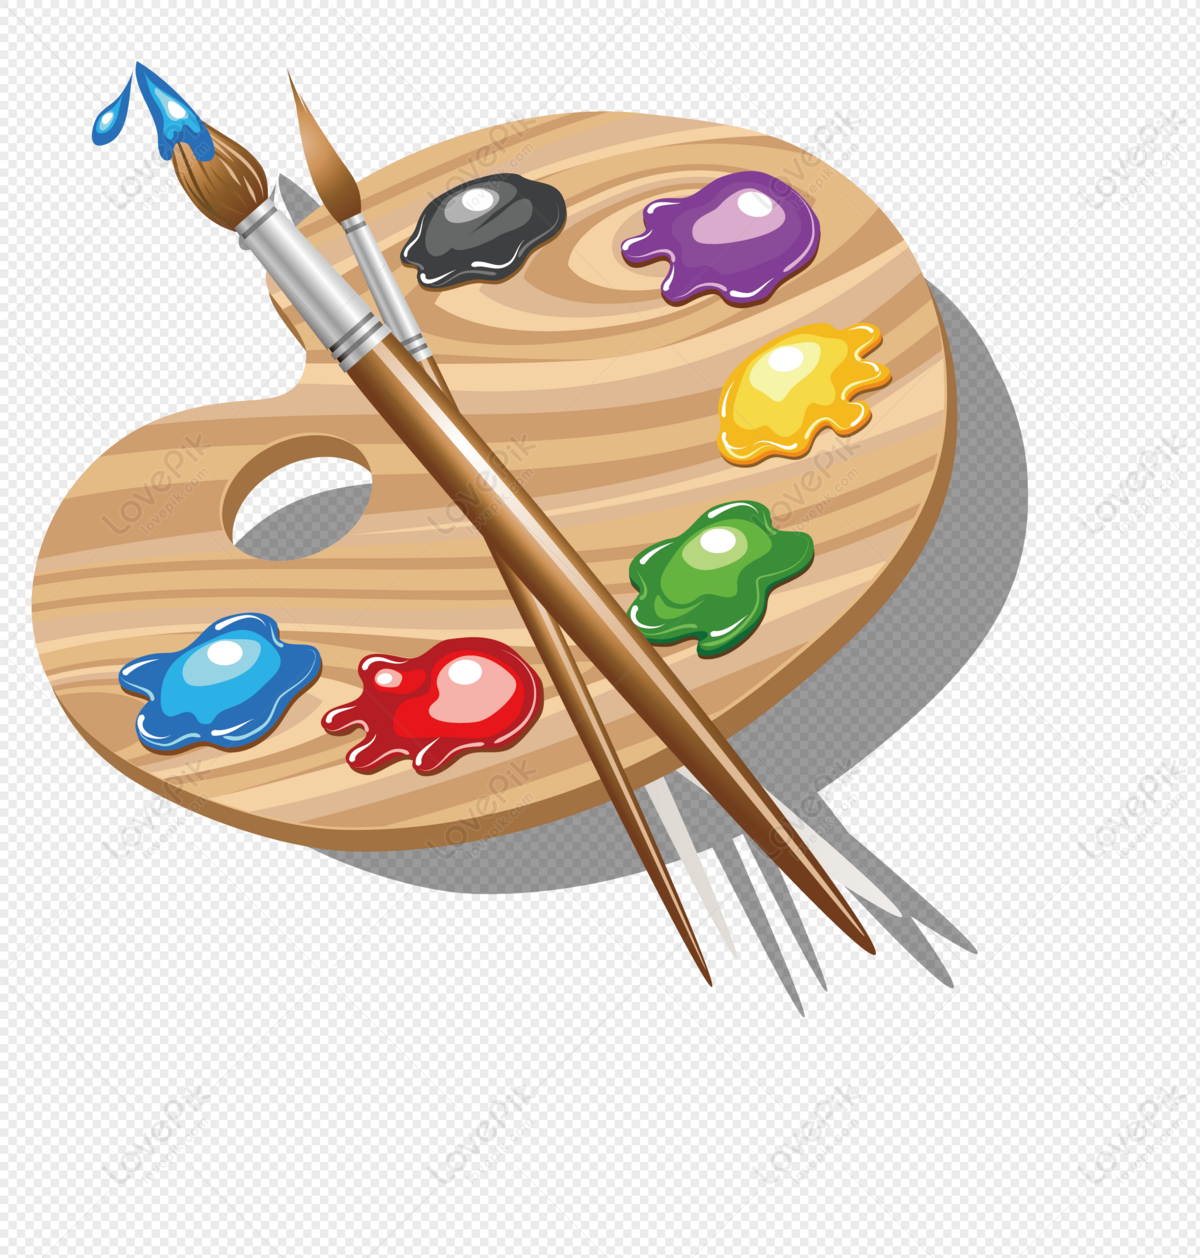 Painting Plate Vector Hd PNG Images, Color Painting Plate Material, Color,  Videos Plate, Material PNG Image For Free Download